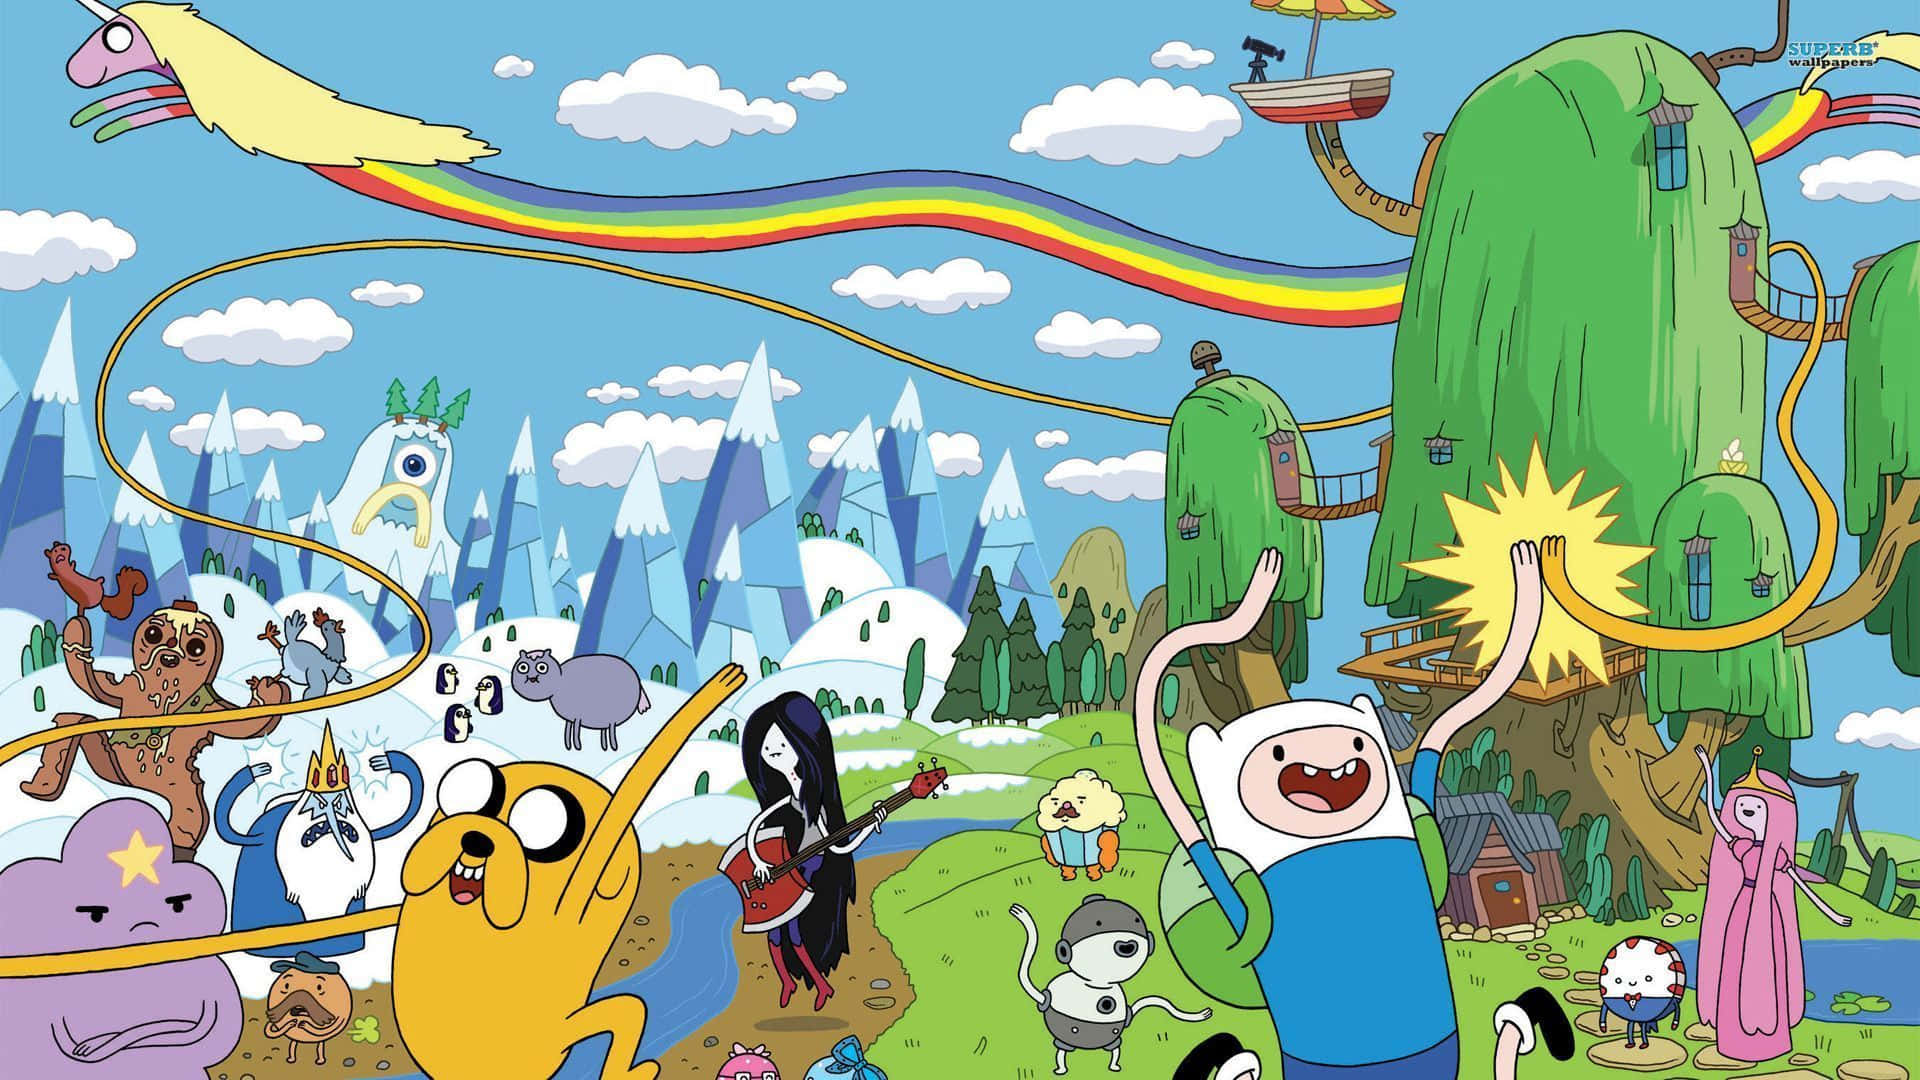 An adventure awaits you in the magical Landscape of Adventure Time Wallpaper